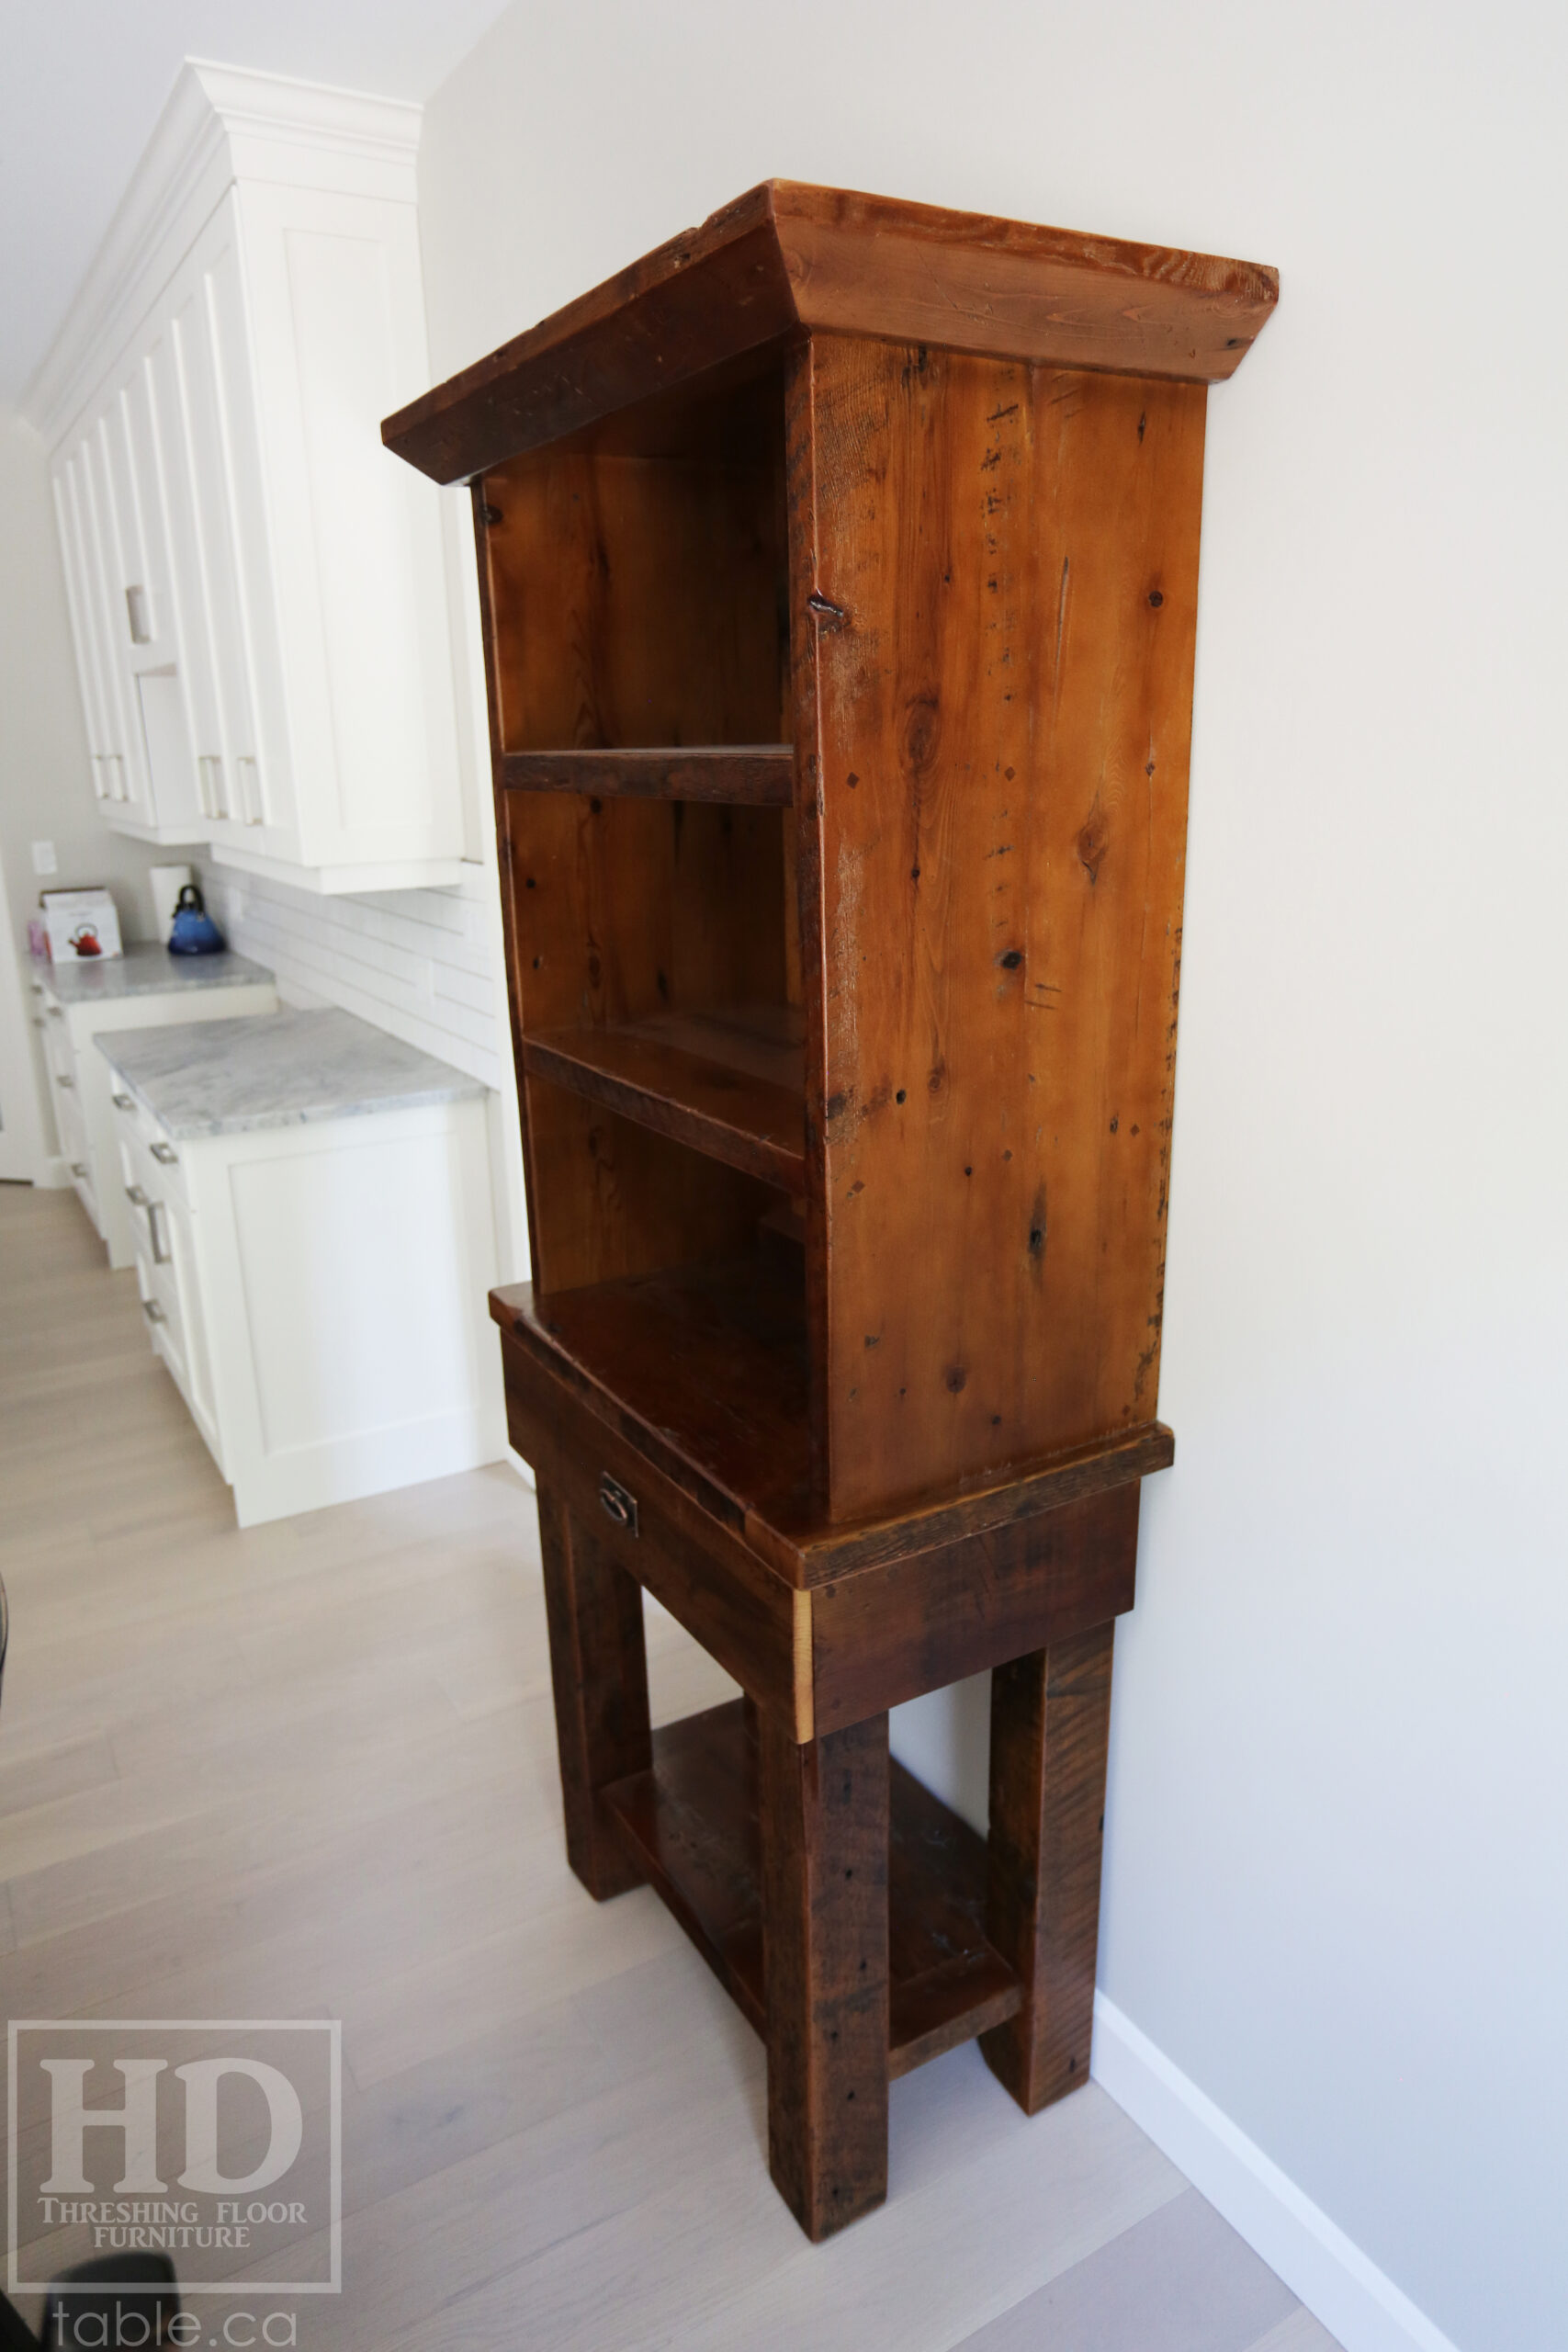 36" Wide Ontario Barnwood Shelving Hutch we made for an Elmwood home - 6 1/2'" height - 18" deep base/ top 16" deep - Reclaimed old growth hemlock grainery board construction - Original pioneer edges + distressing kept - Lee Valley Hardware - Satin polyurethane finish - www.table.ca 